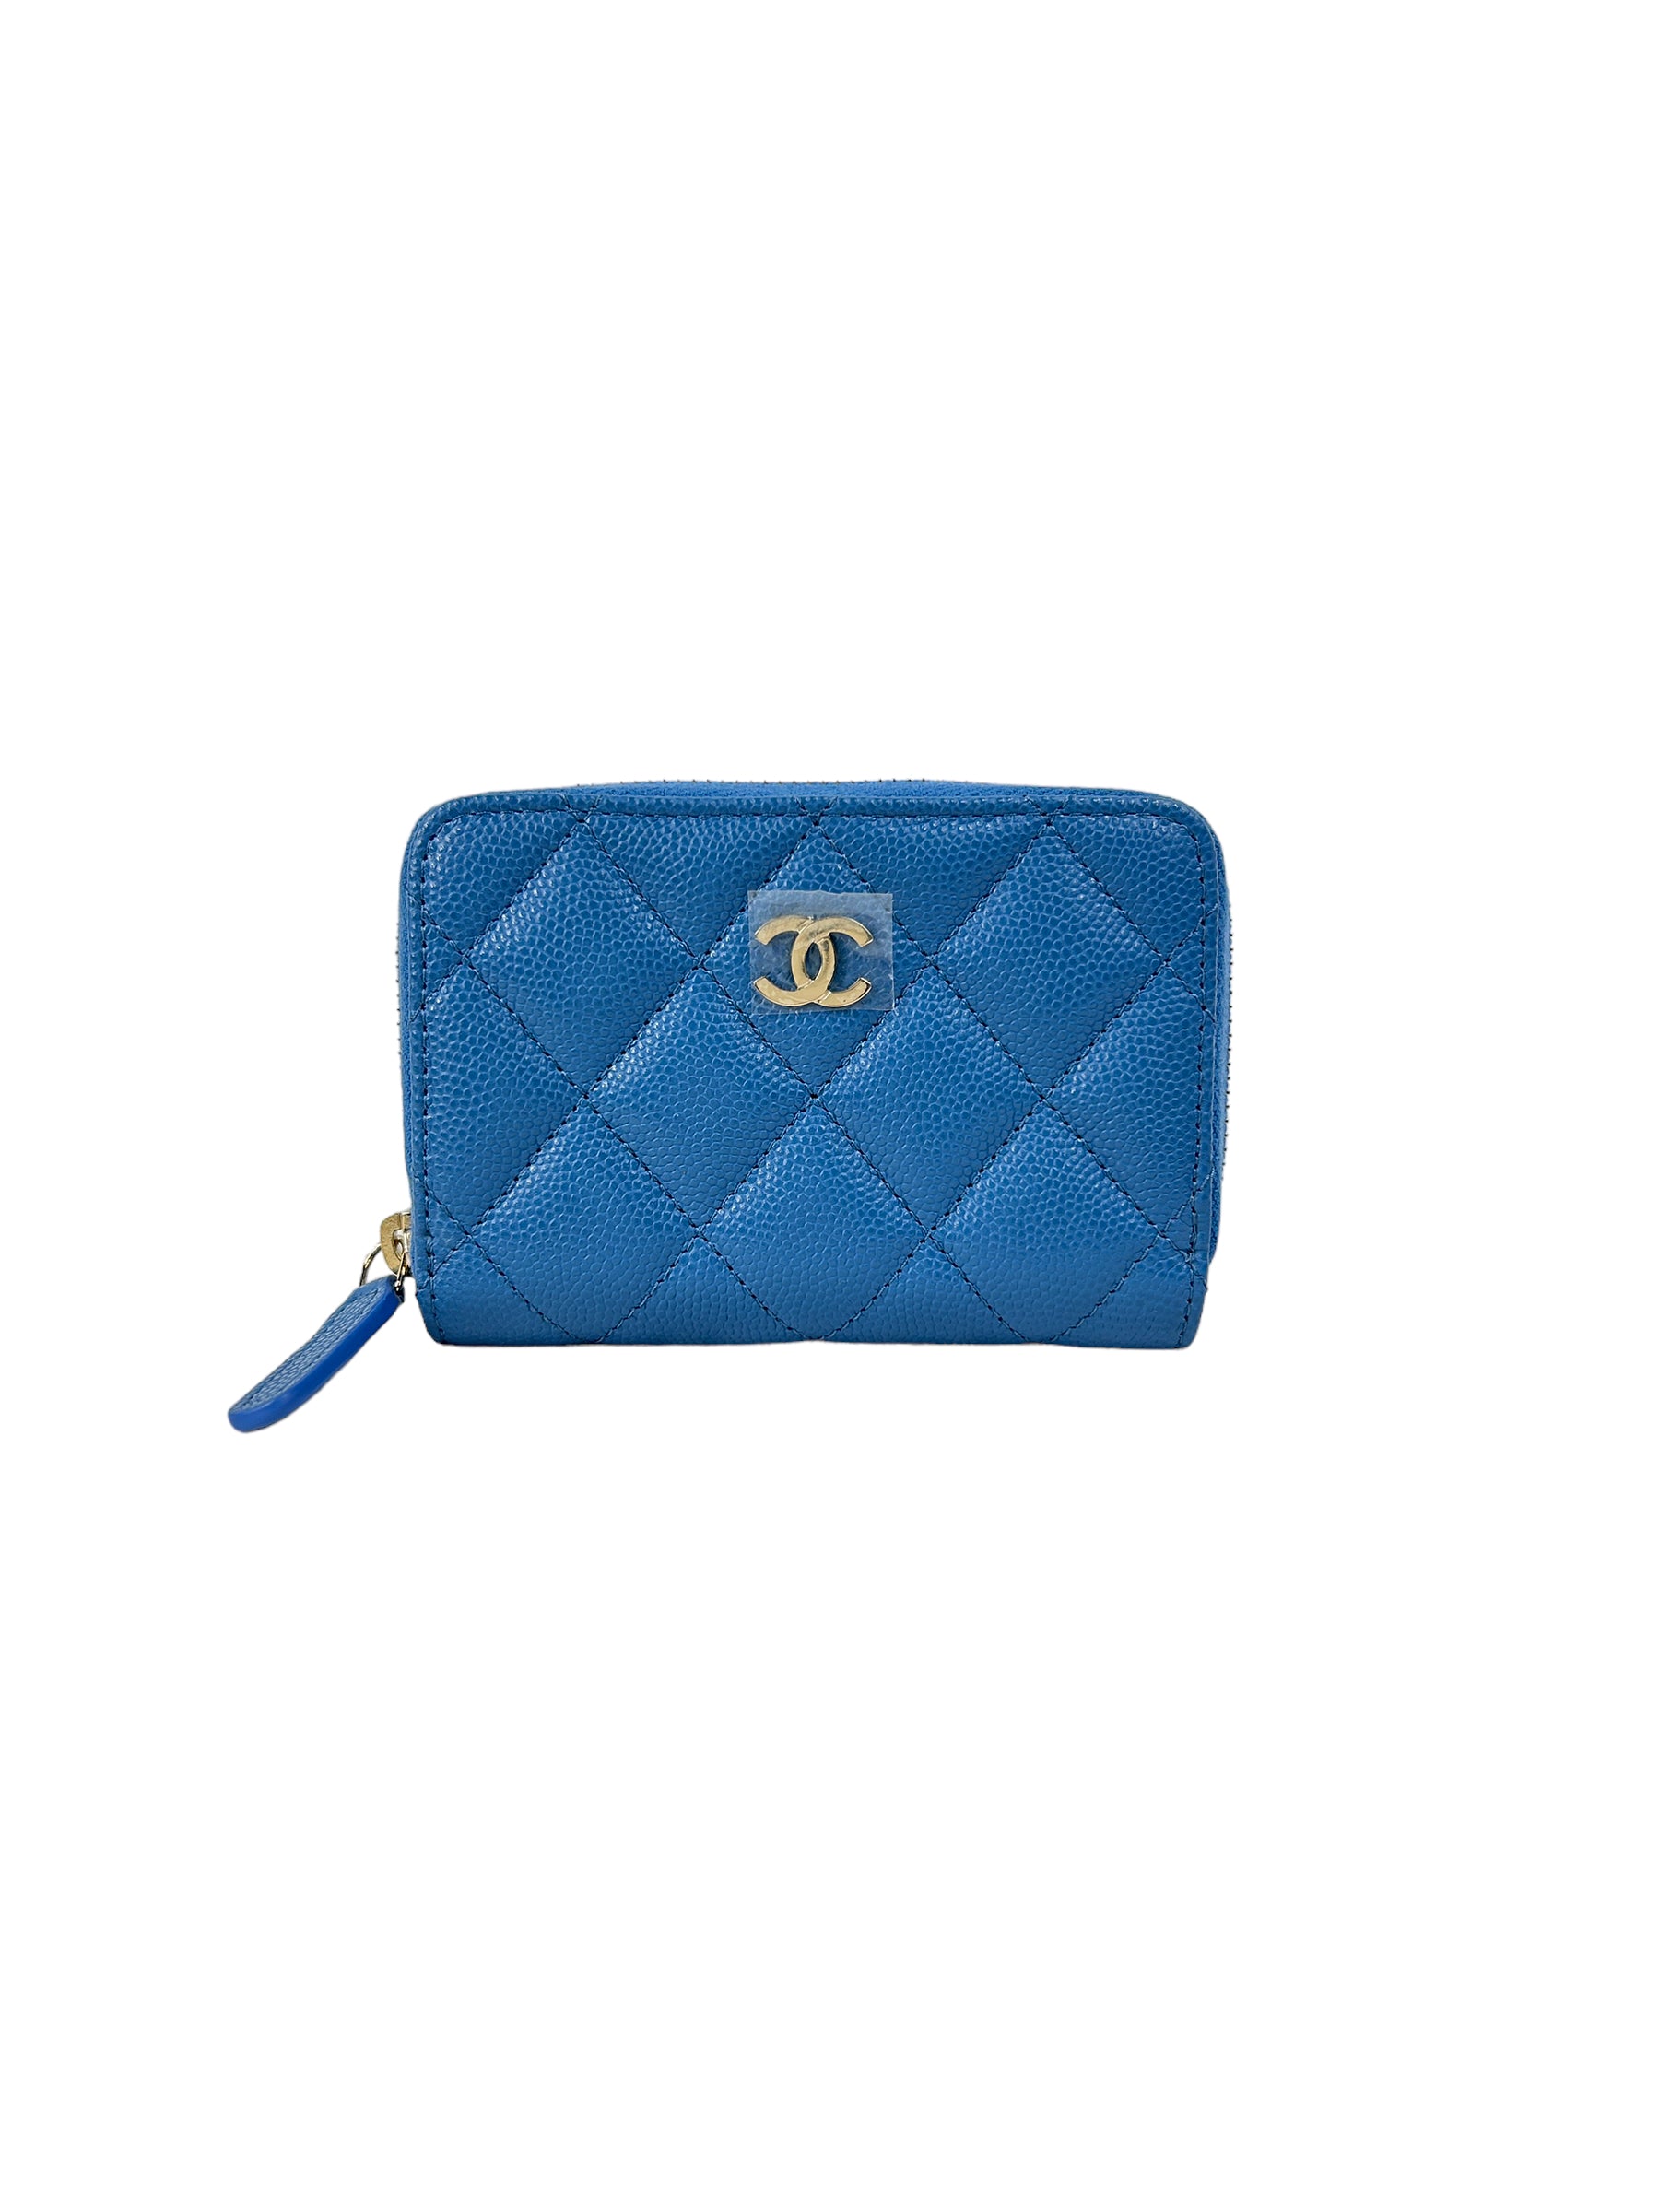 Blue Caviar Quilted Card Coin Pouch Wallet w/GHW